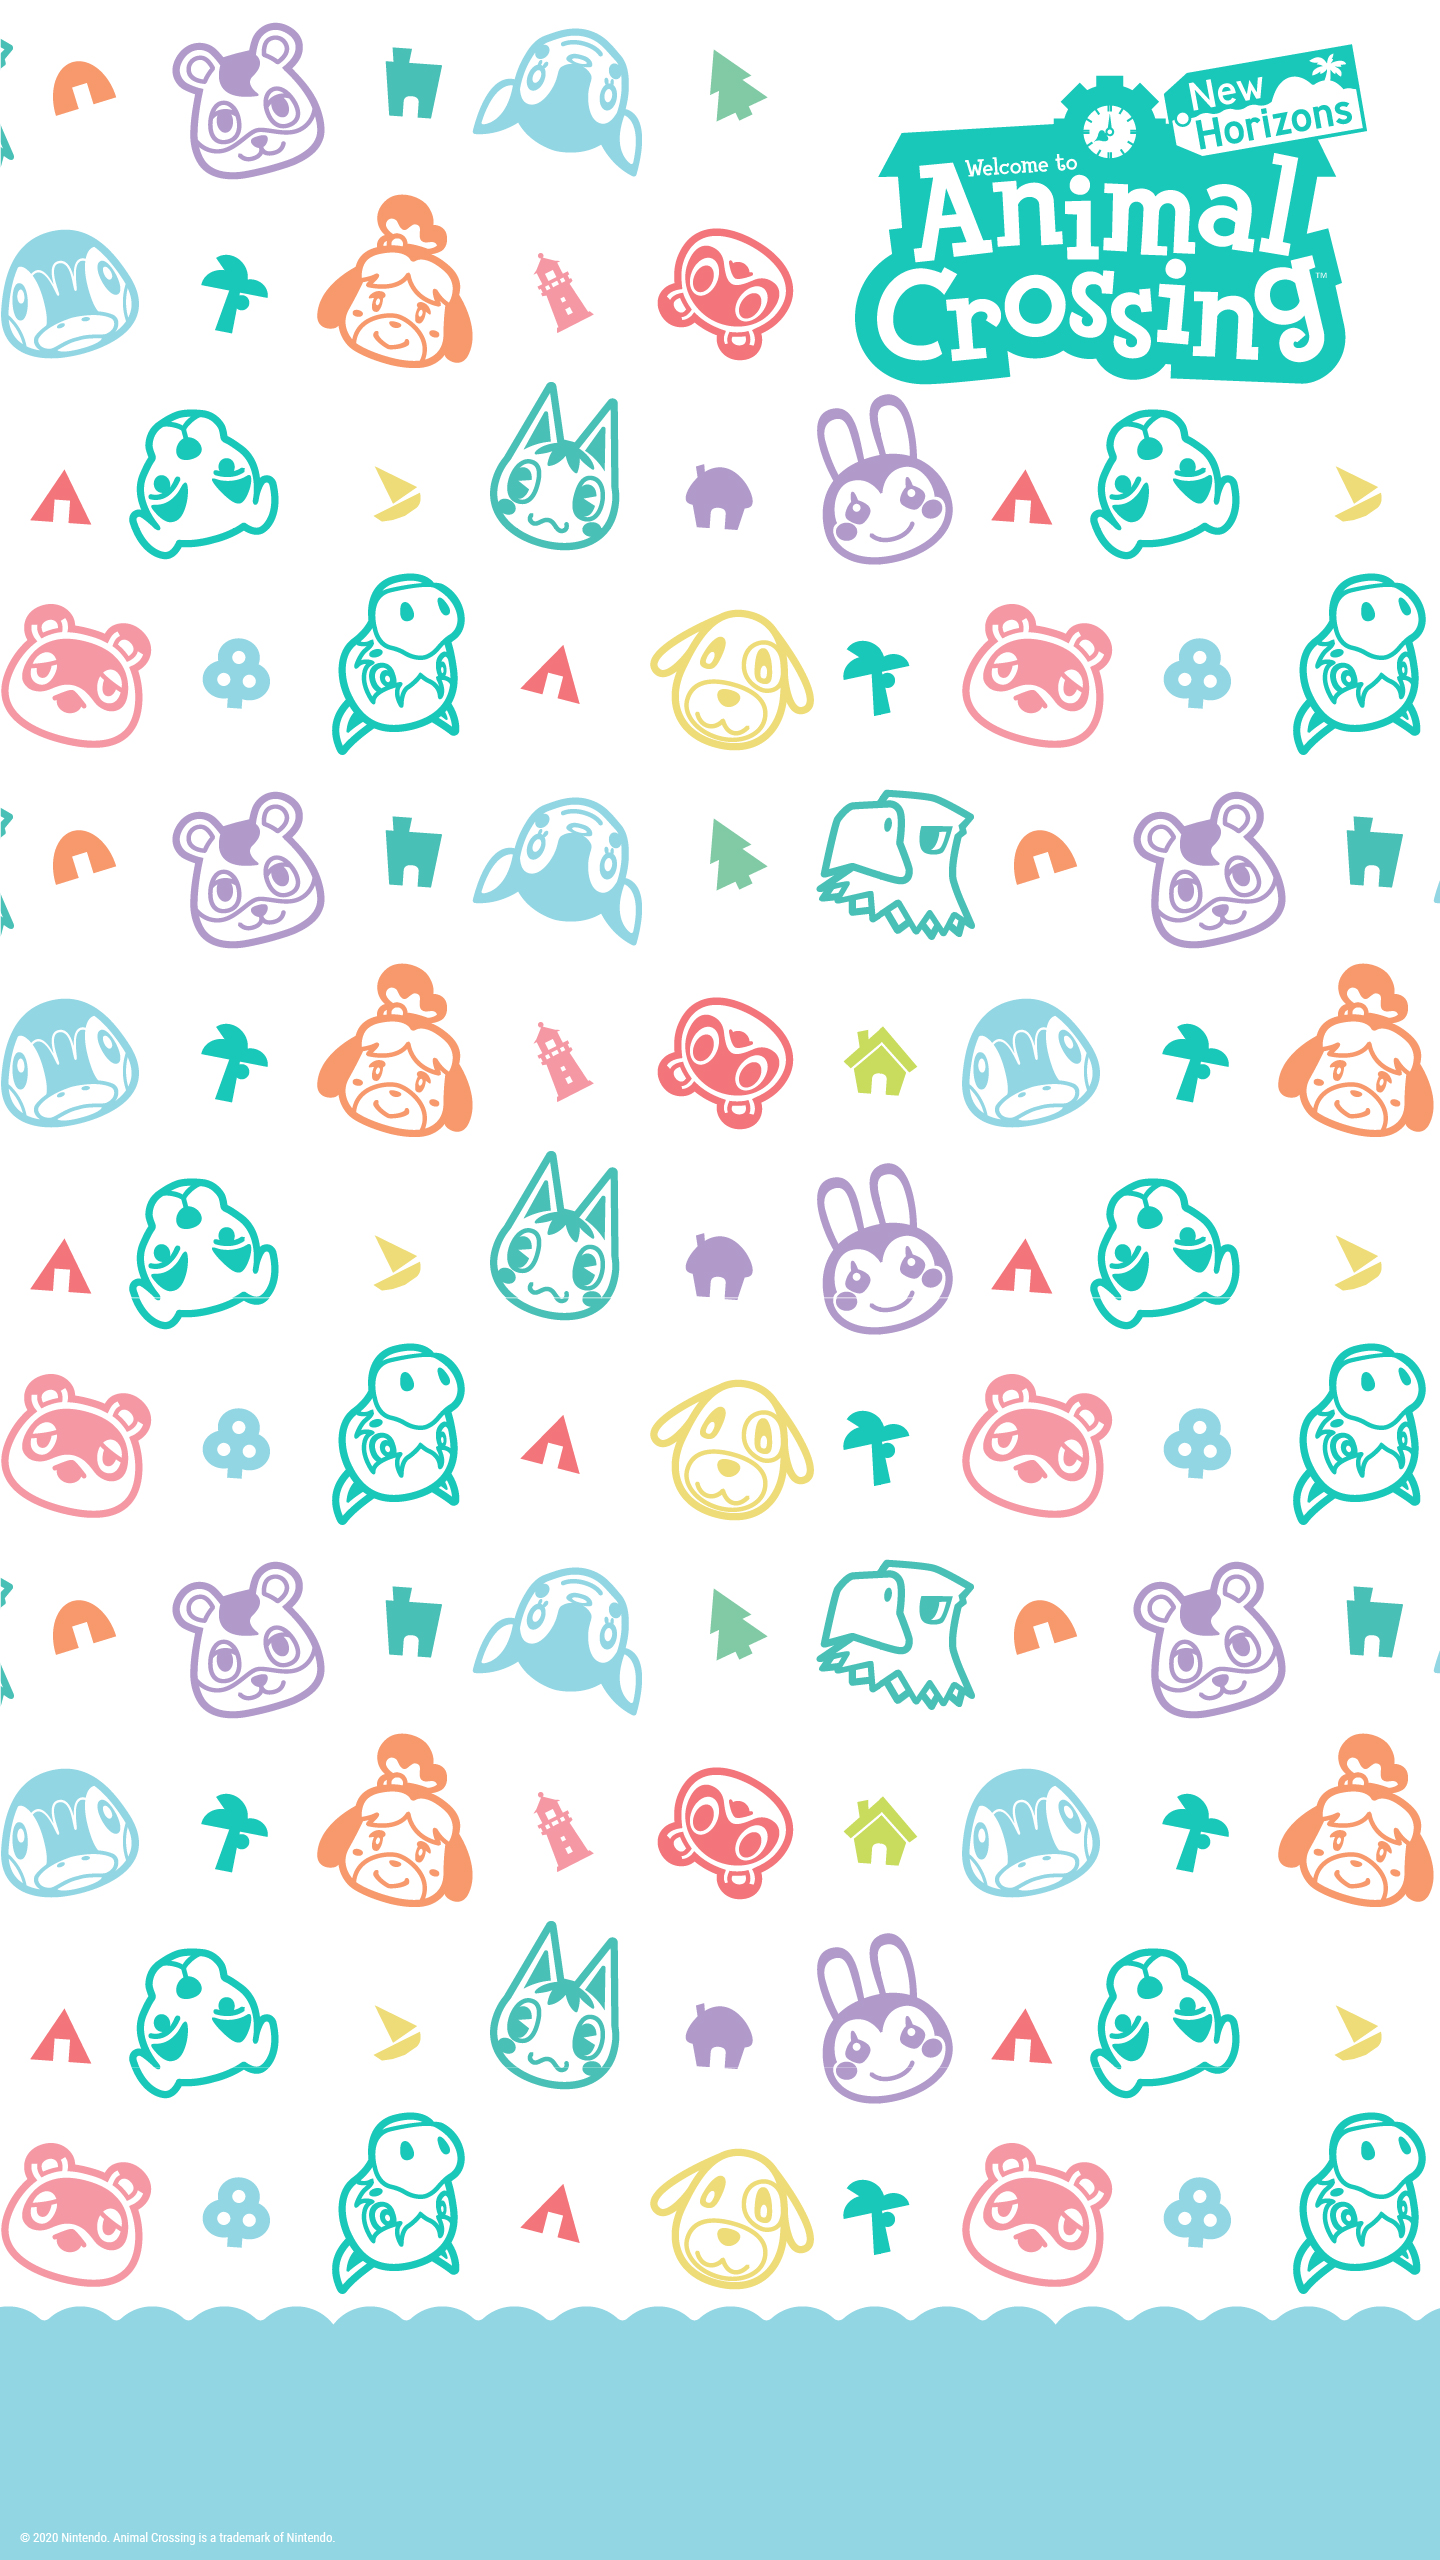 Here is a cute animal crossing phone background I made from the wallpaper  uTheTastyPastry made   rAnimalCrossing